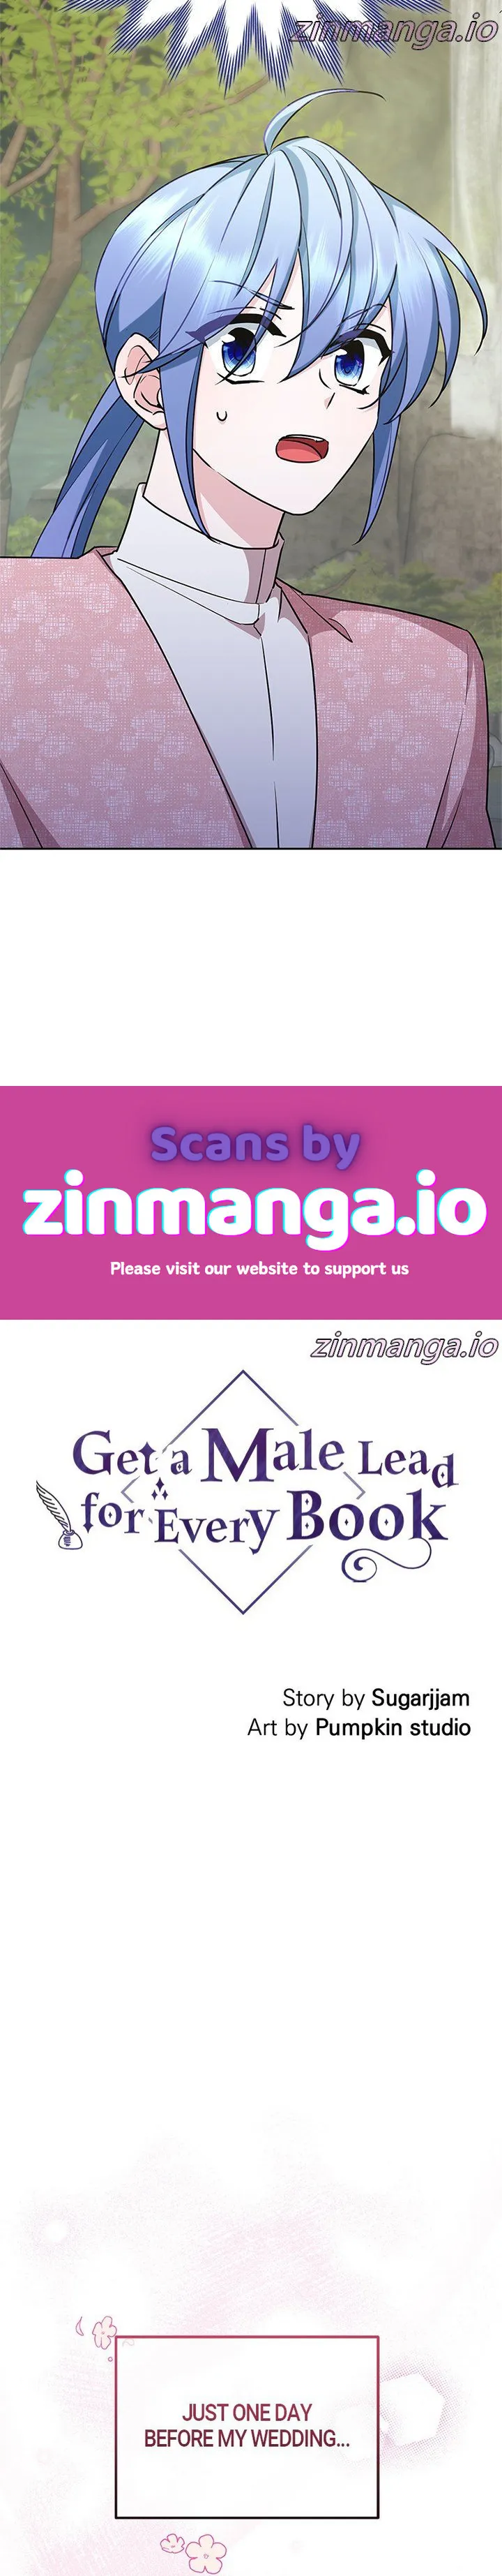 Get A Male Lead For Every Book - Page 1